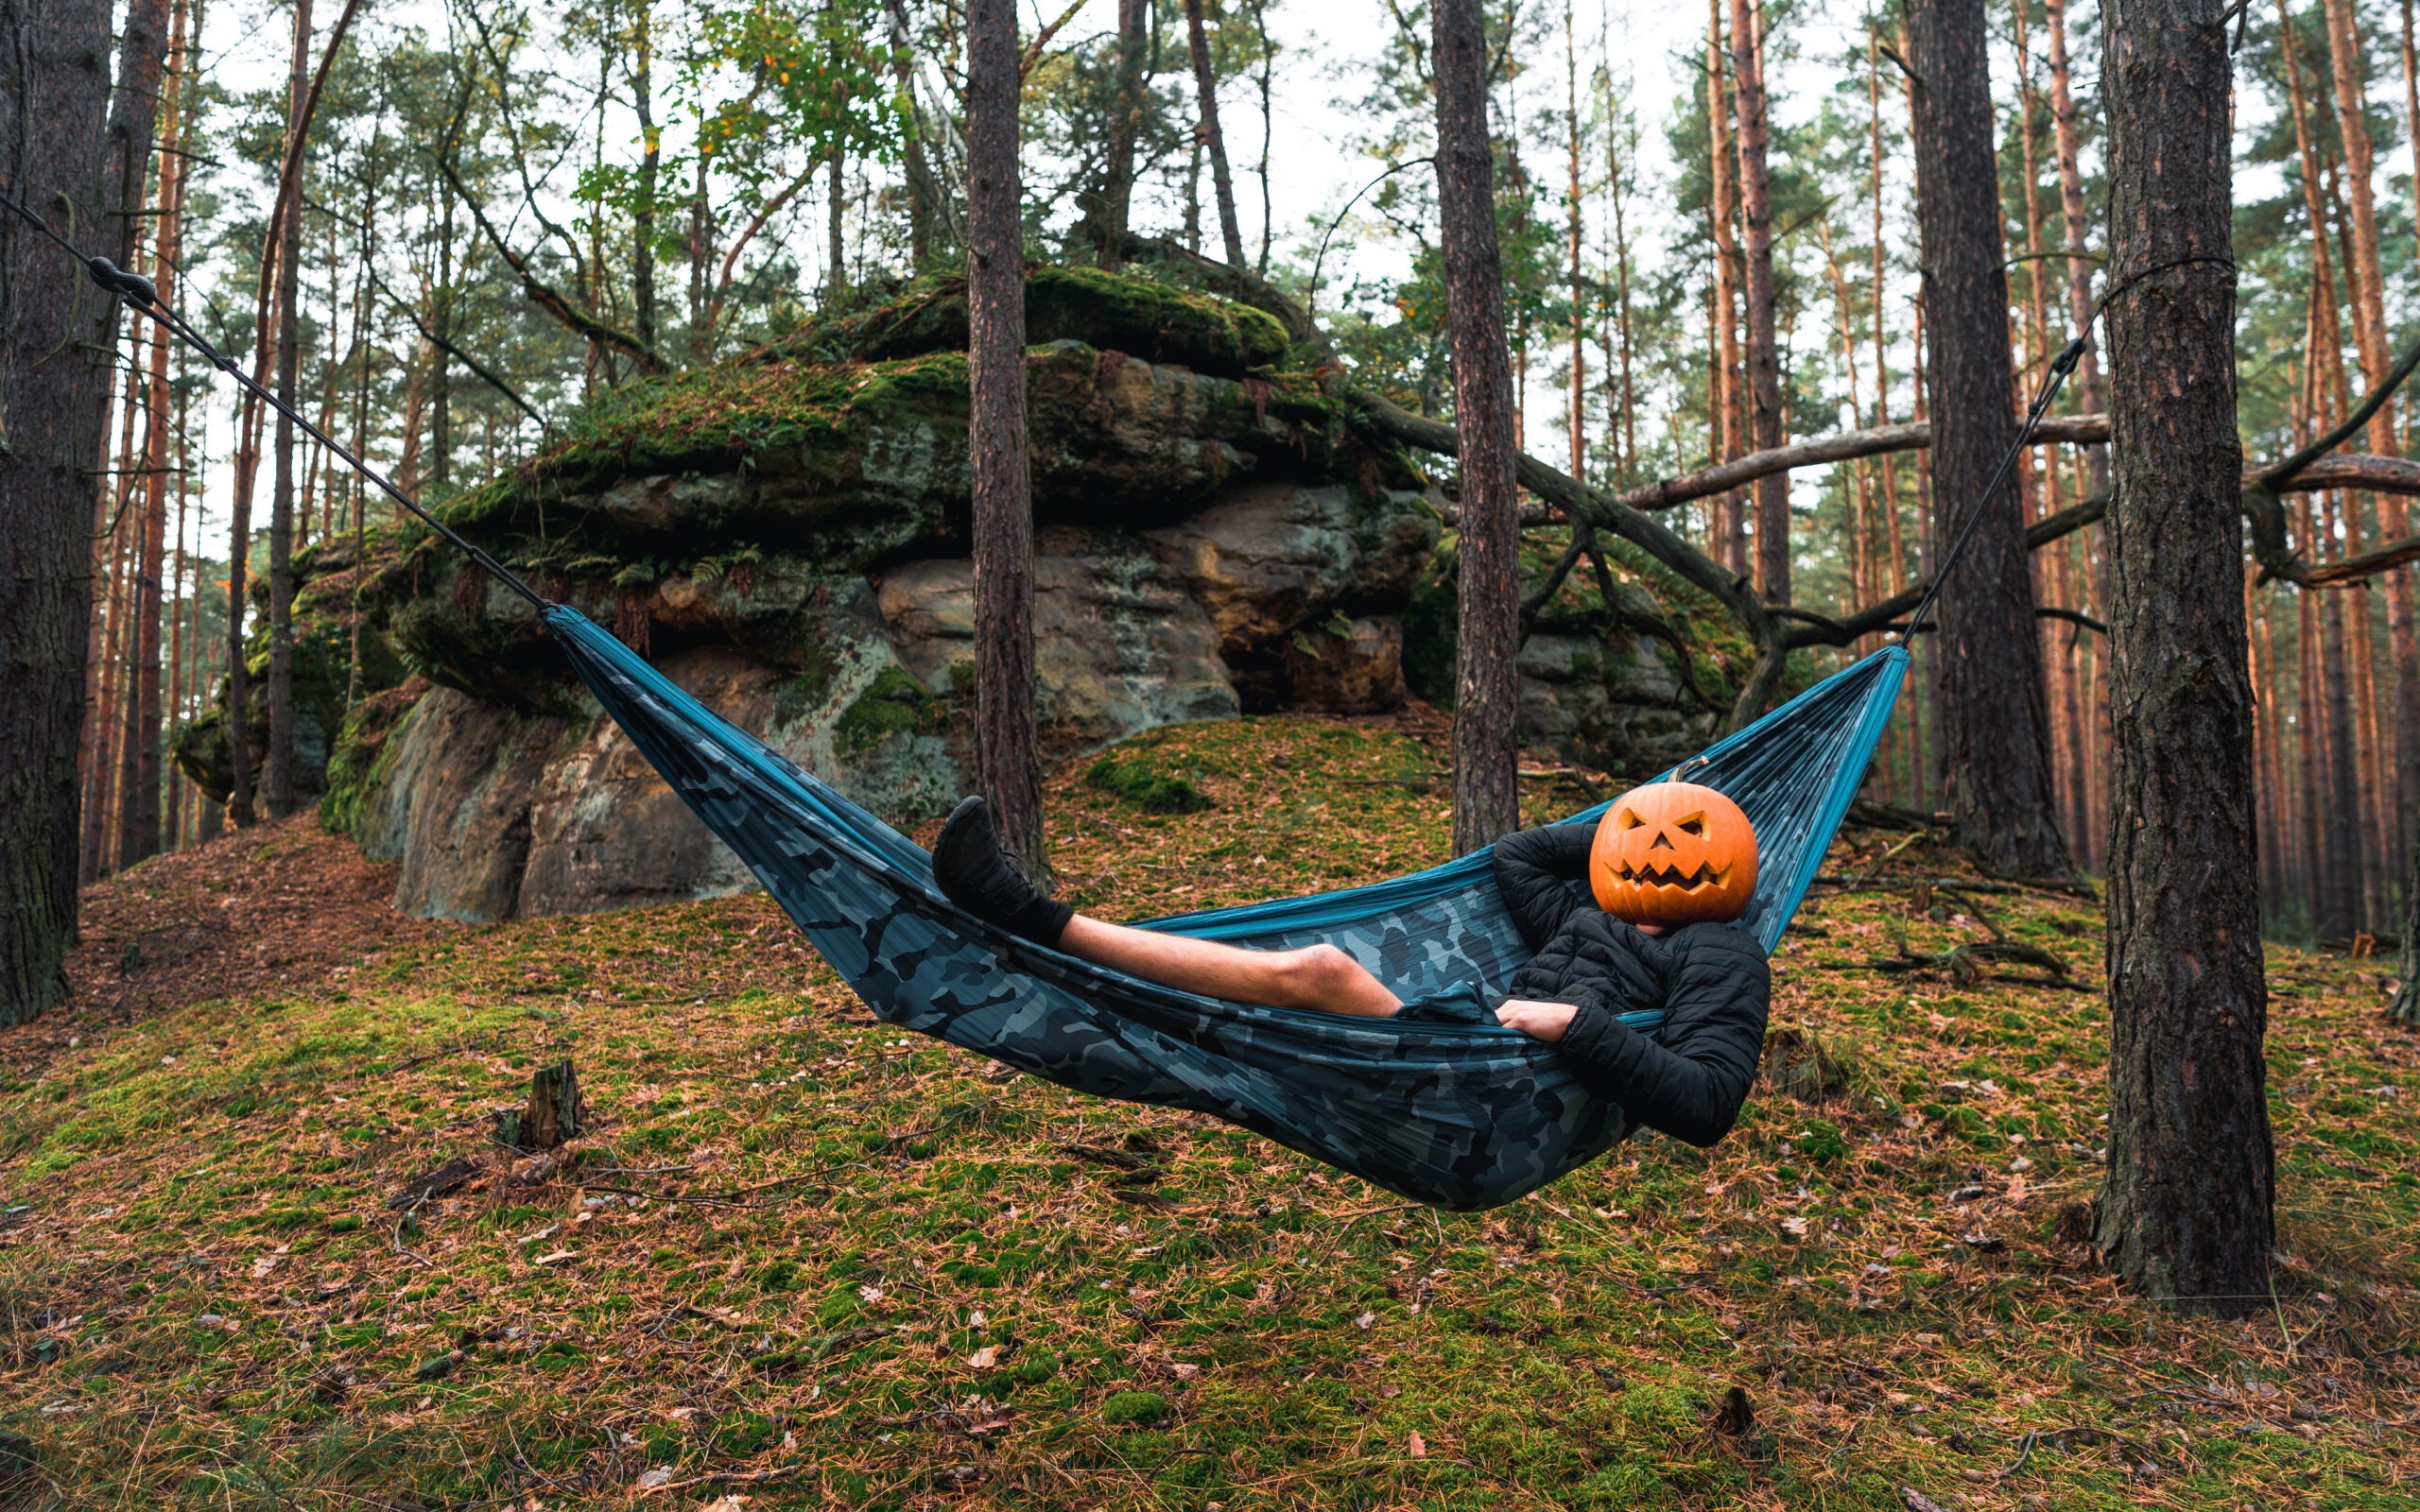 Halloween jack of lantern camper hanging out in a hammock in the woods.